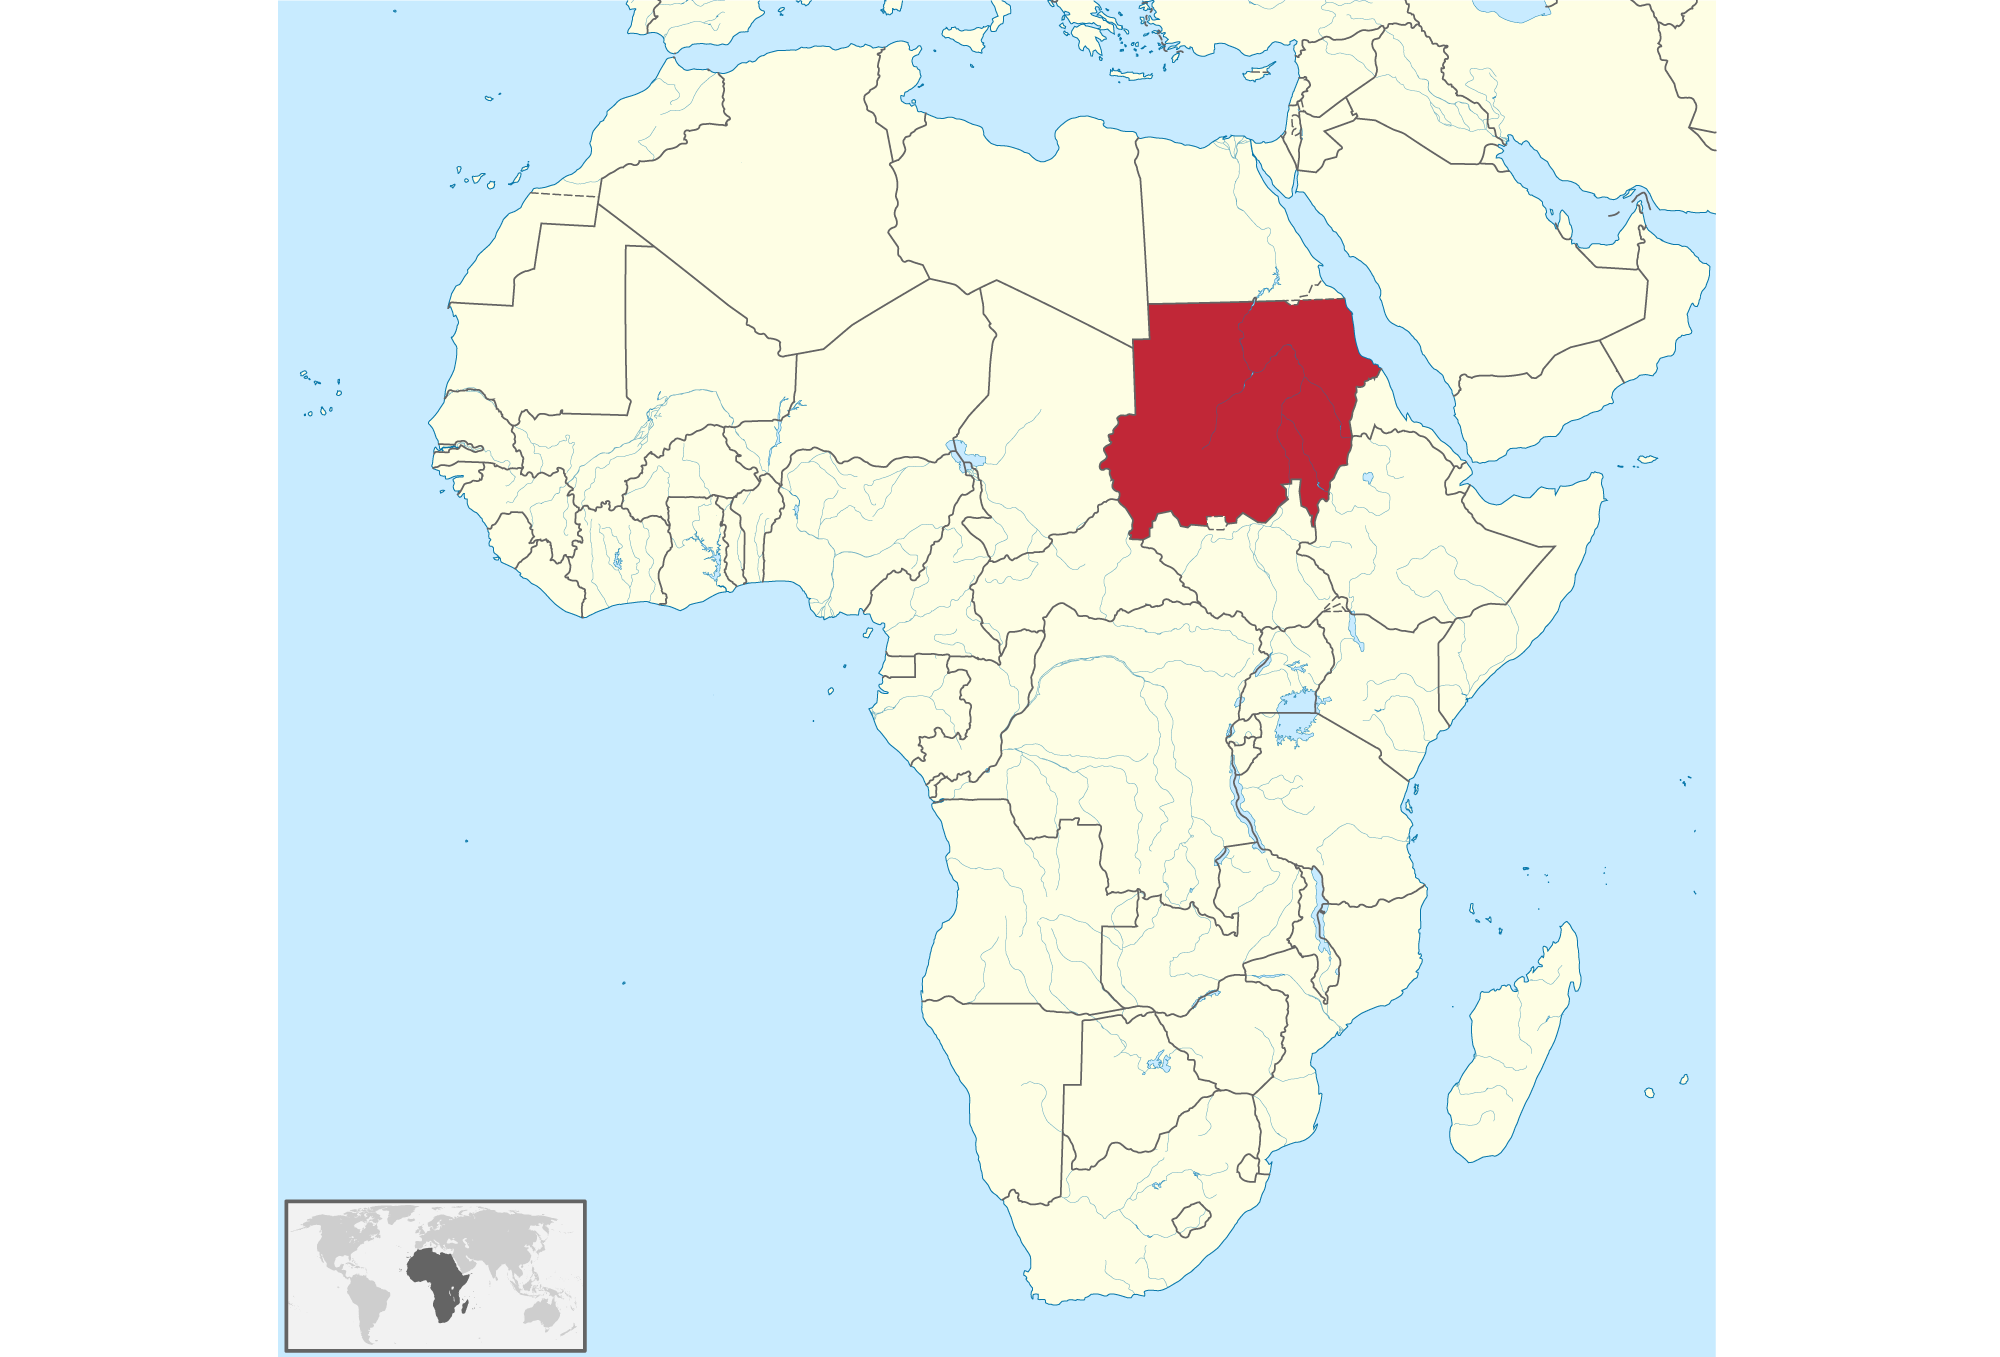 Map of Africa showing the location of Sudan, which is shaded red. Sudan occurs in northeastern Africa, immediately south Egypt. Its northeast border is on the Red Sea, and Eritrea and Ethiopia are also roughly to the east. South Sudan is to the south, and the Central African Republic, Chad, and Libya are roughly to the west.